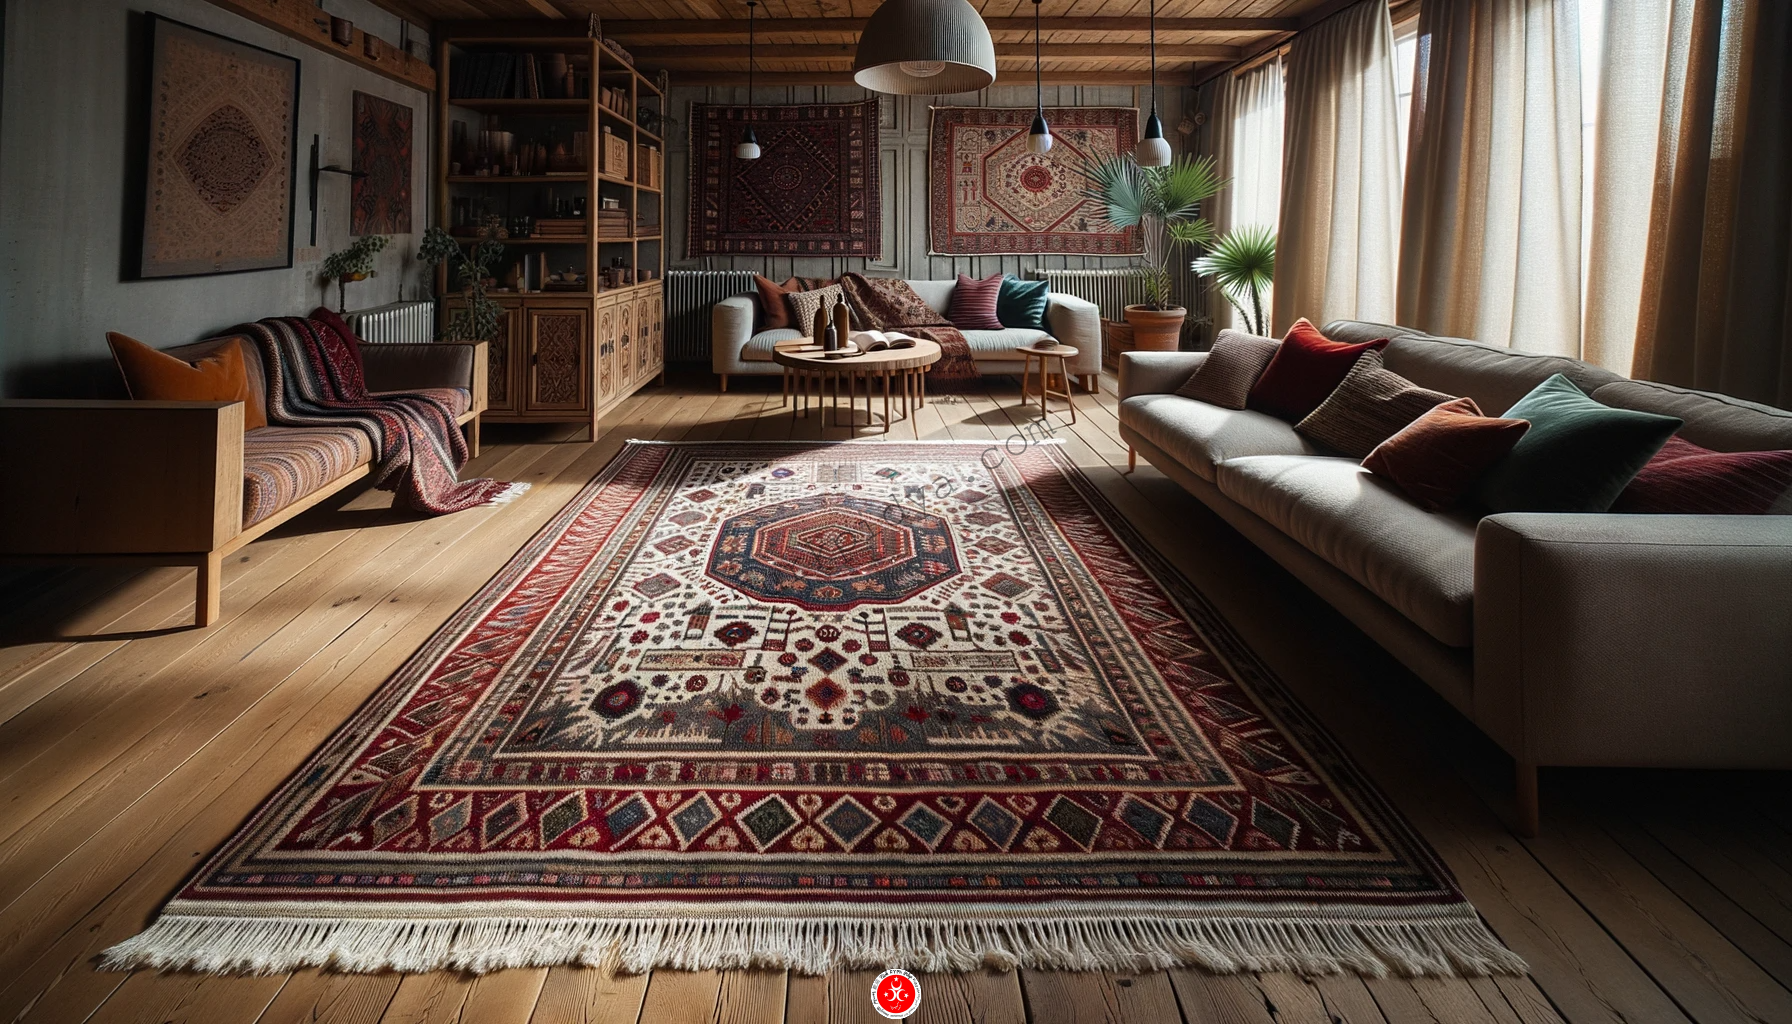 DALL·E 2023 10 09 22.32.01 Photo of a handwoven Anatolian rug displayed in a well lit room. The rug showcases intricate patterns with dominant colors of crimson indigo and oli